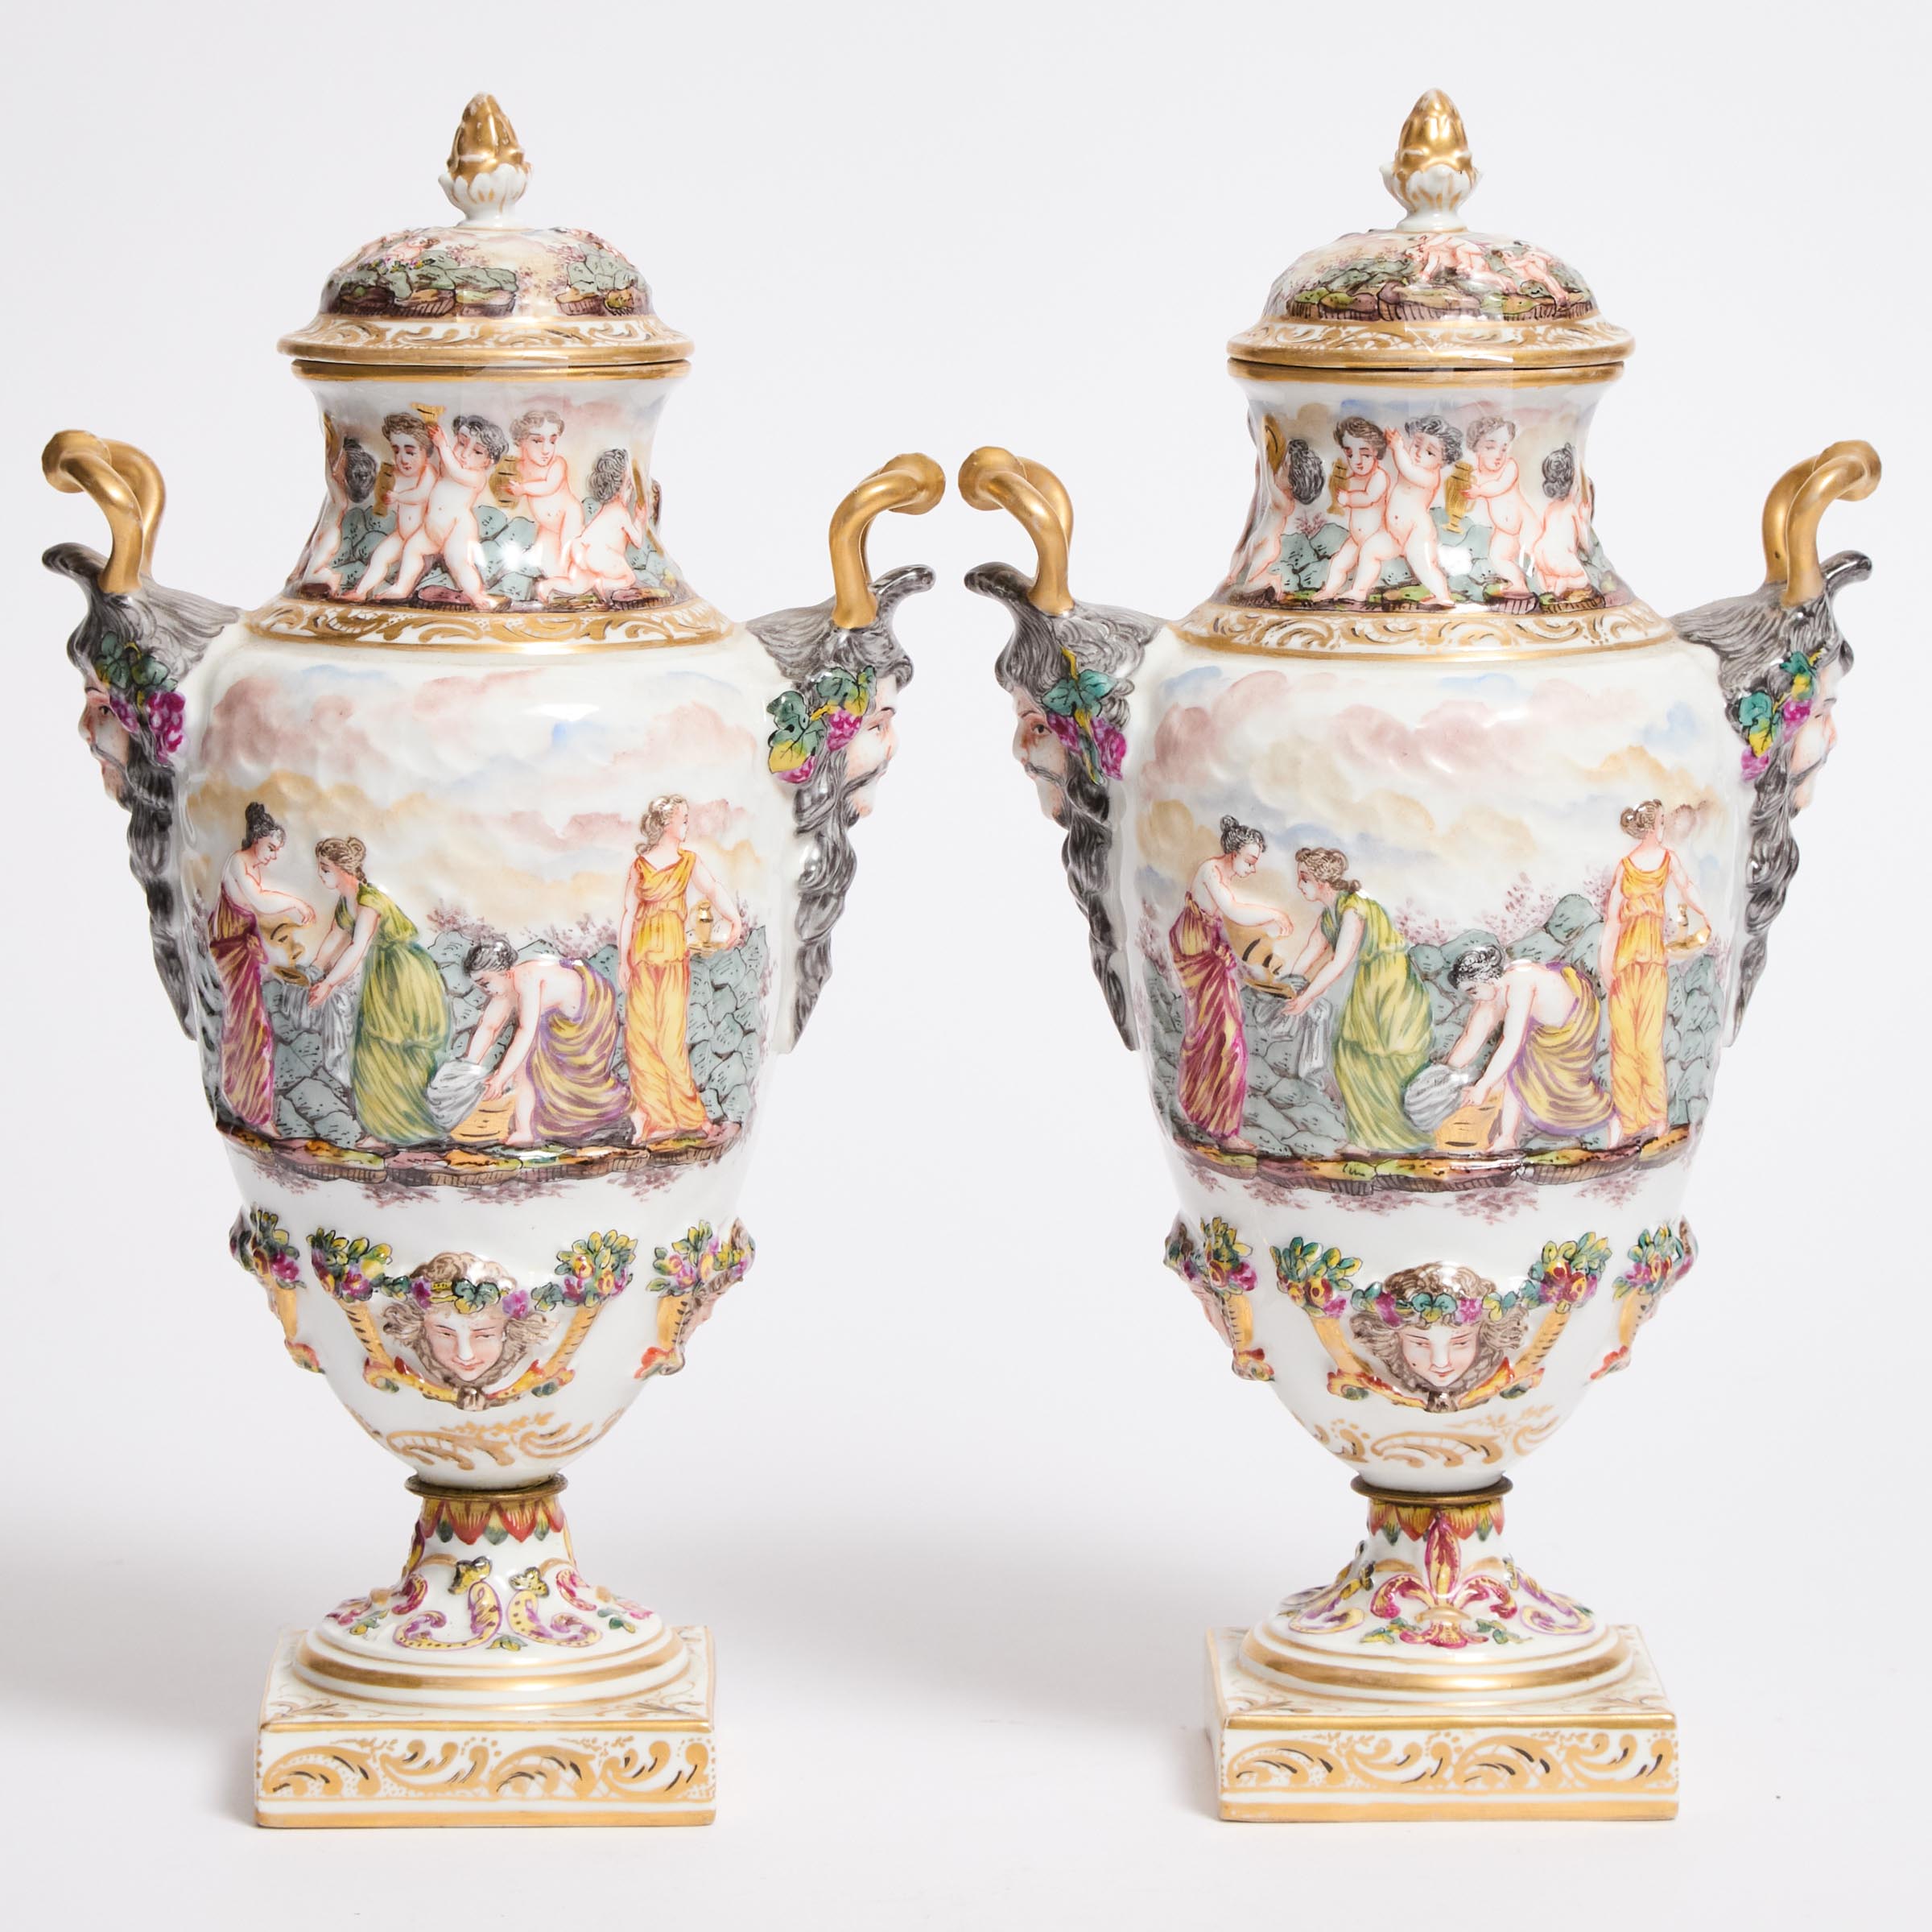 Pair of Naples Porcelain Covered Urns,